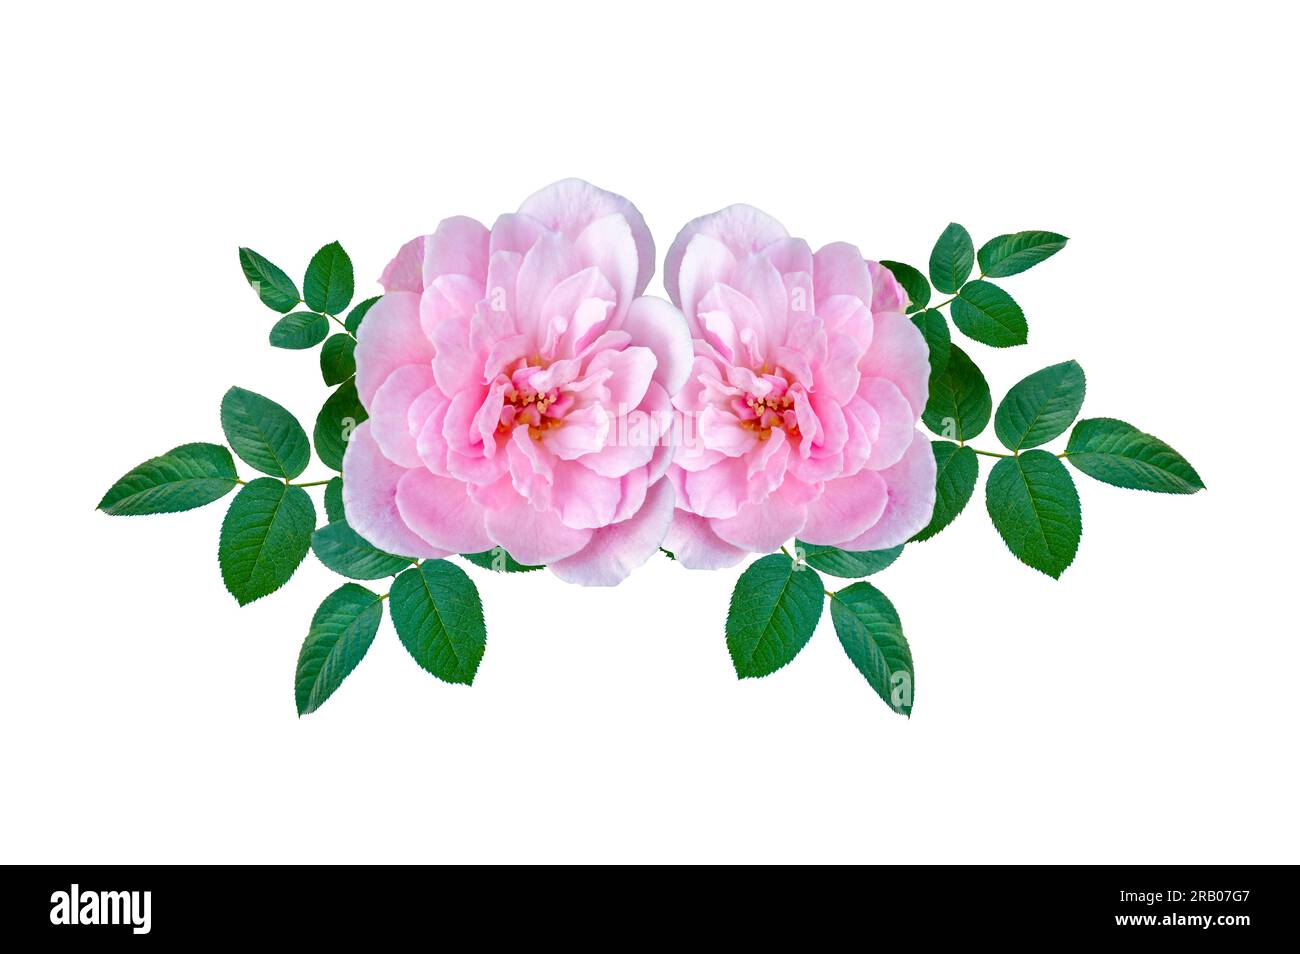 Bouquet of pink roses on white background. Isolate Stock Photo